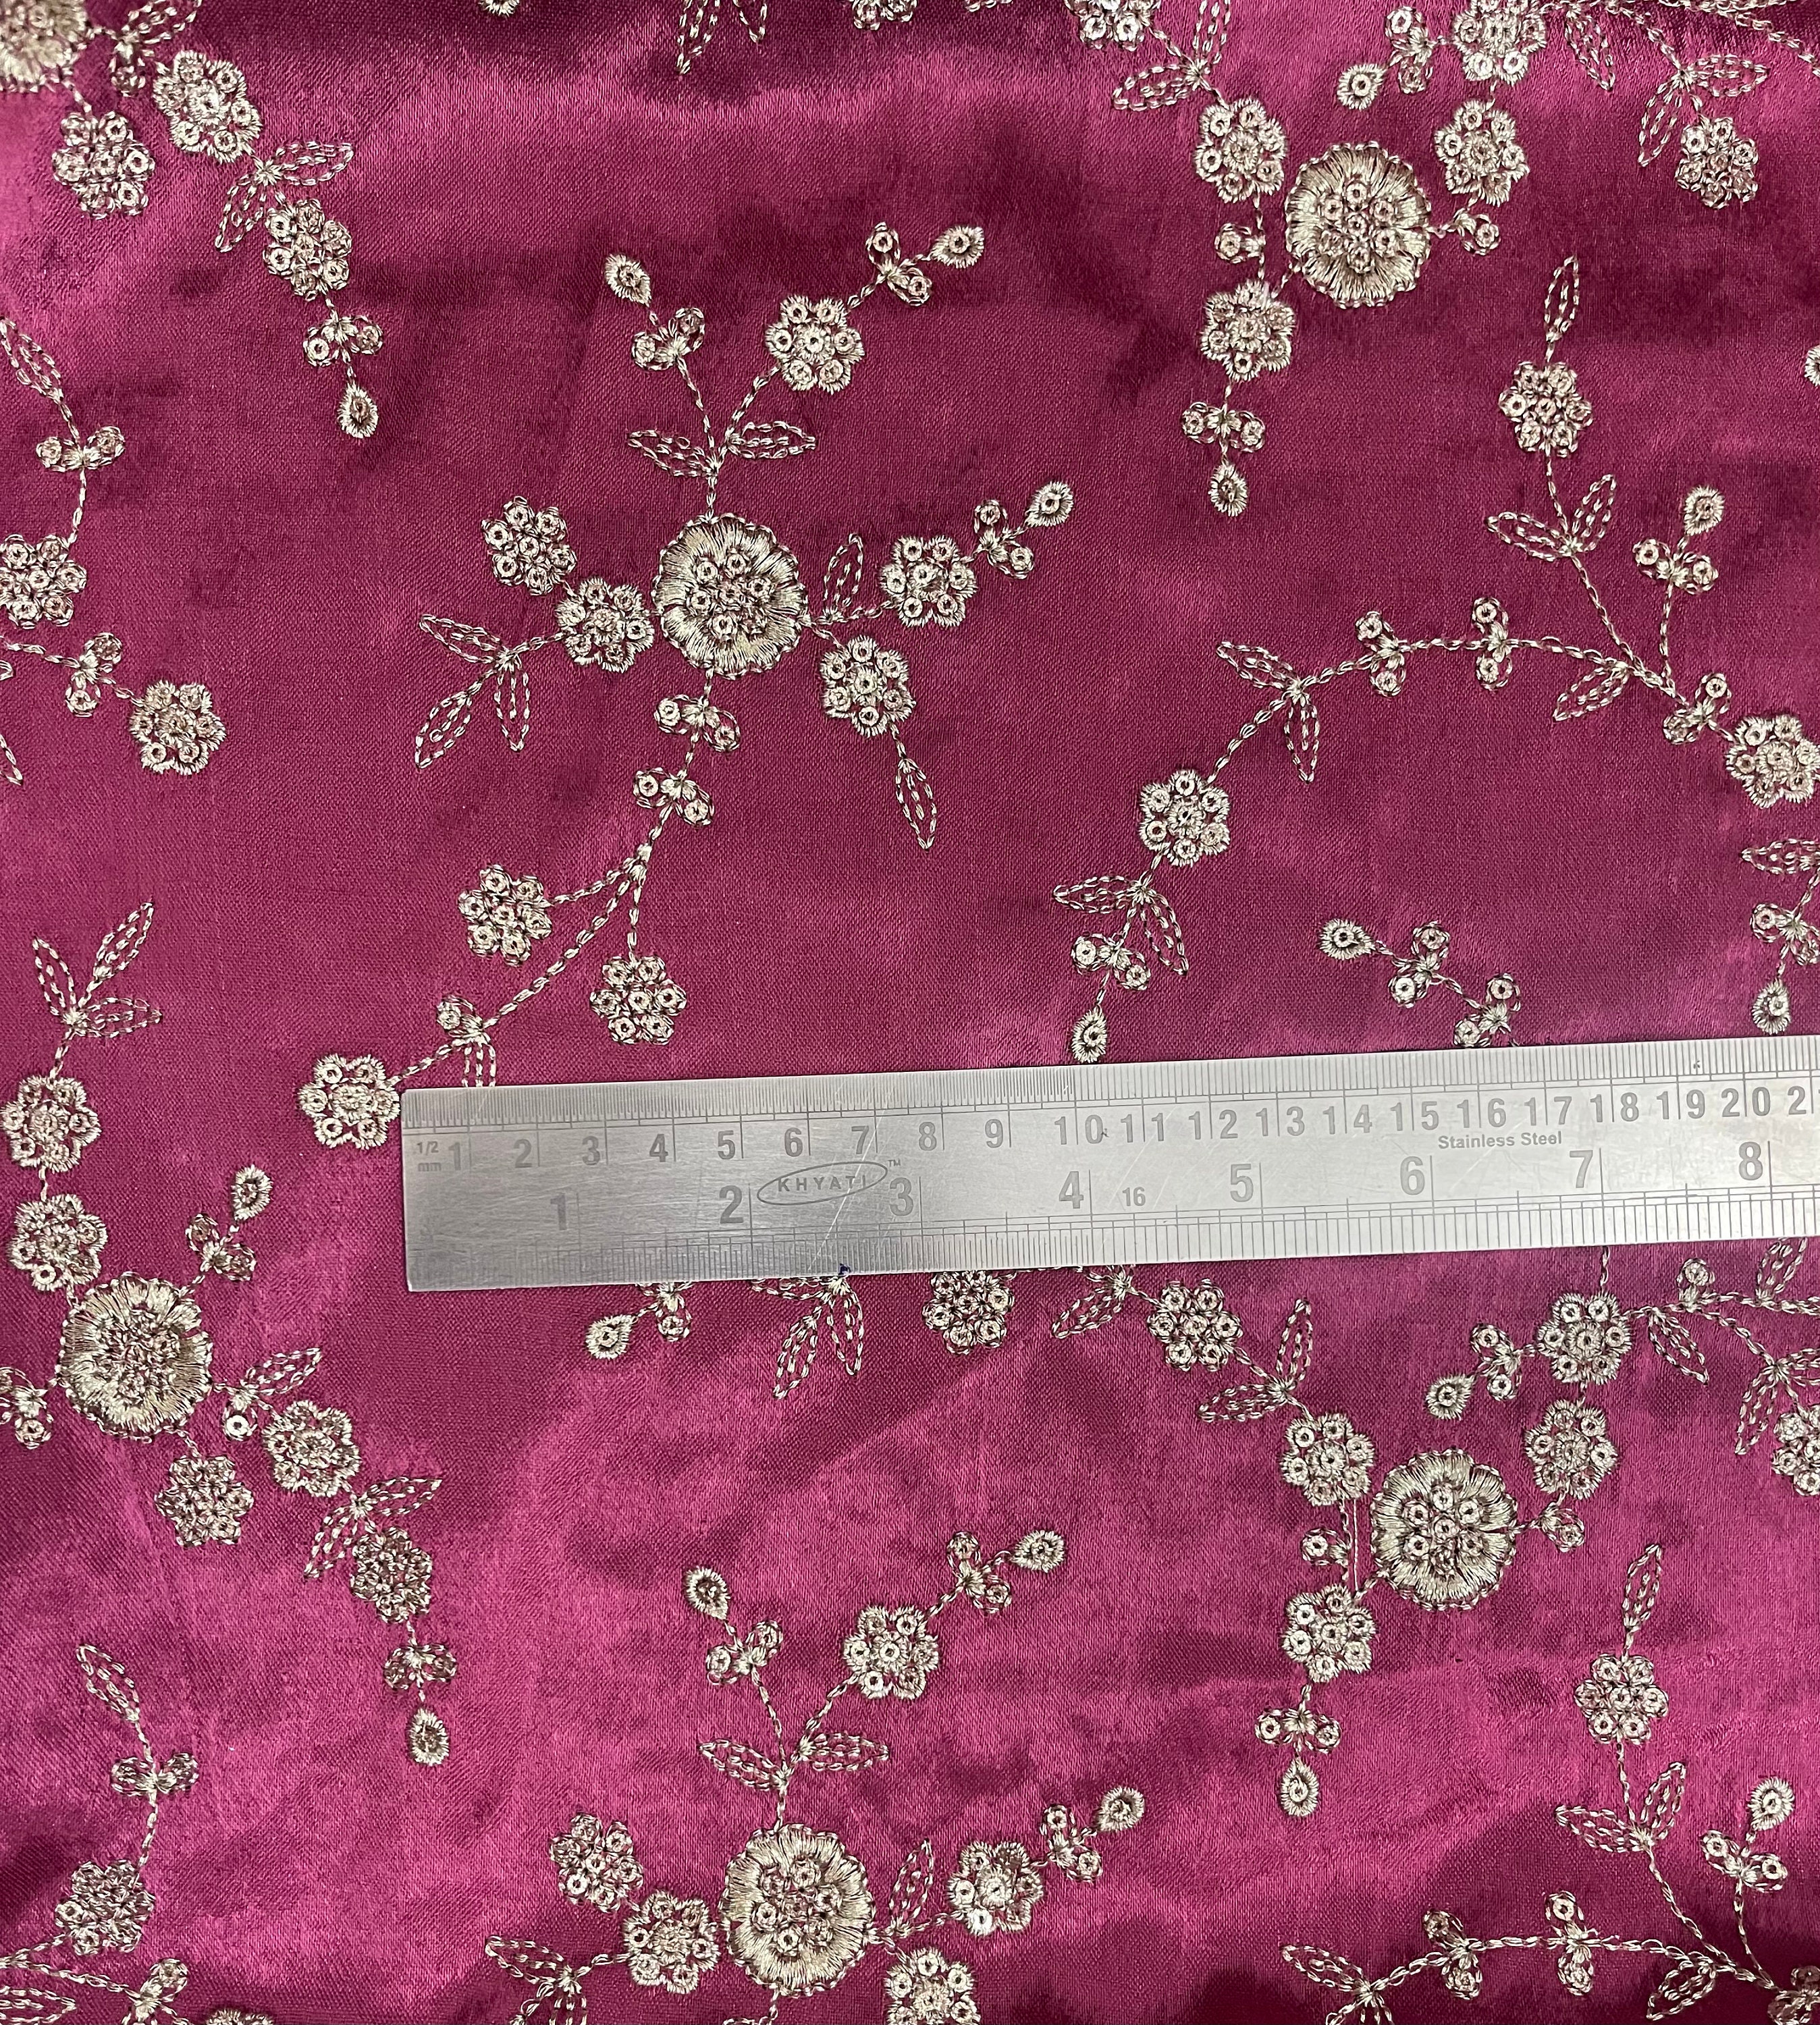 Fabric Dekho's Embroidered Fabric  Buy Embroidery Fabric @ Rs.110/mtr